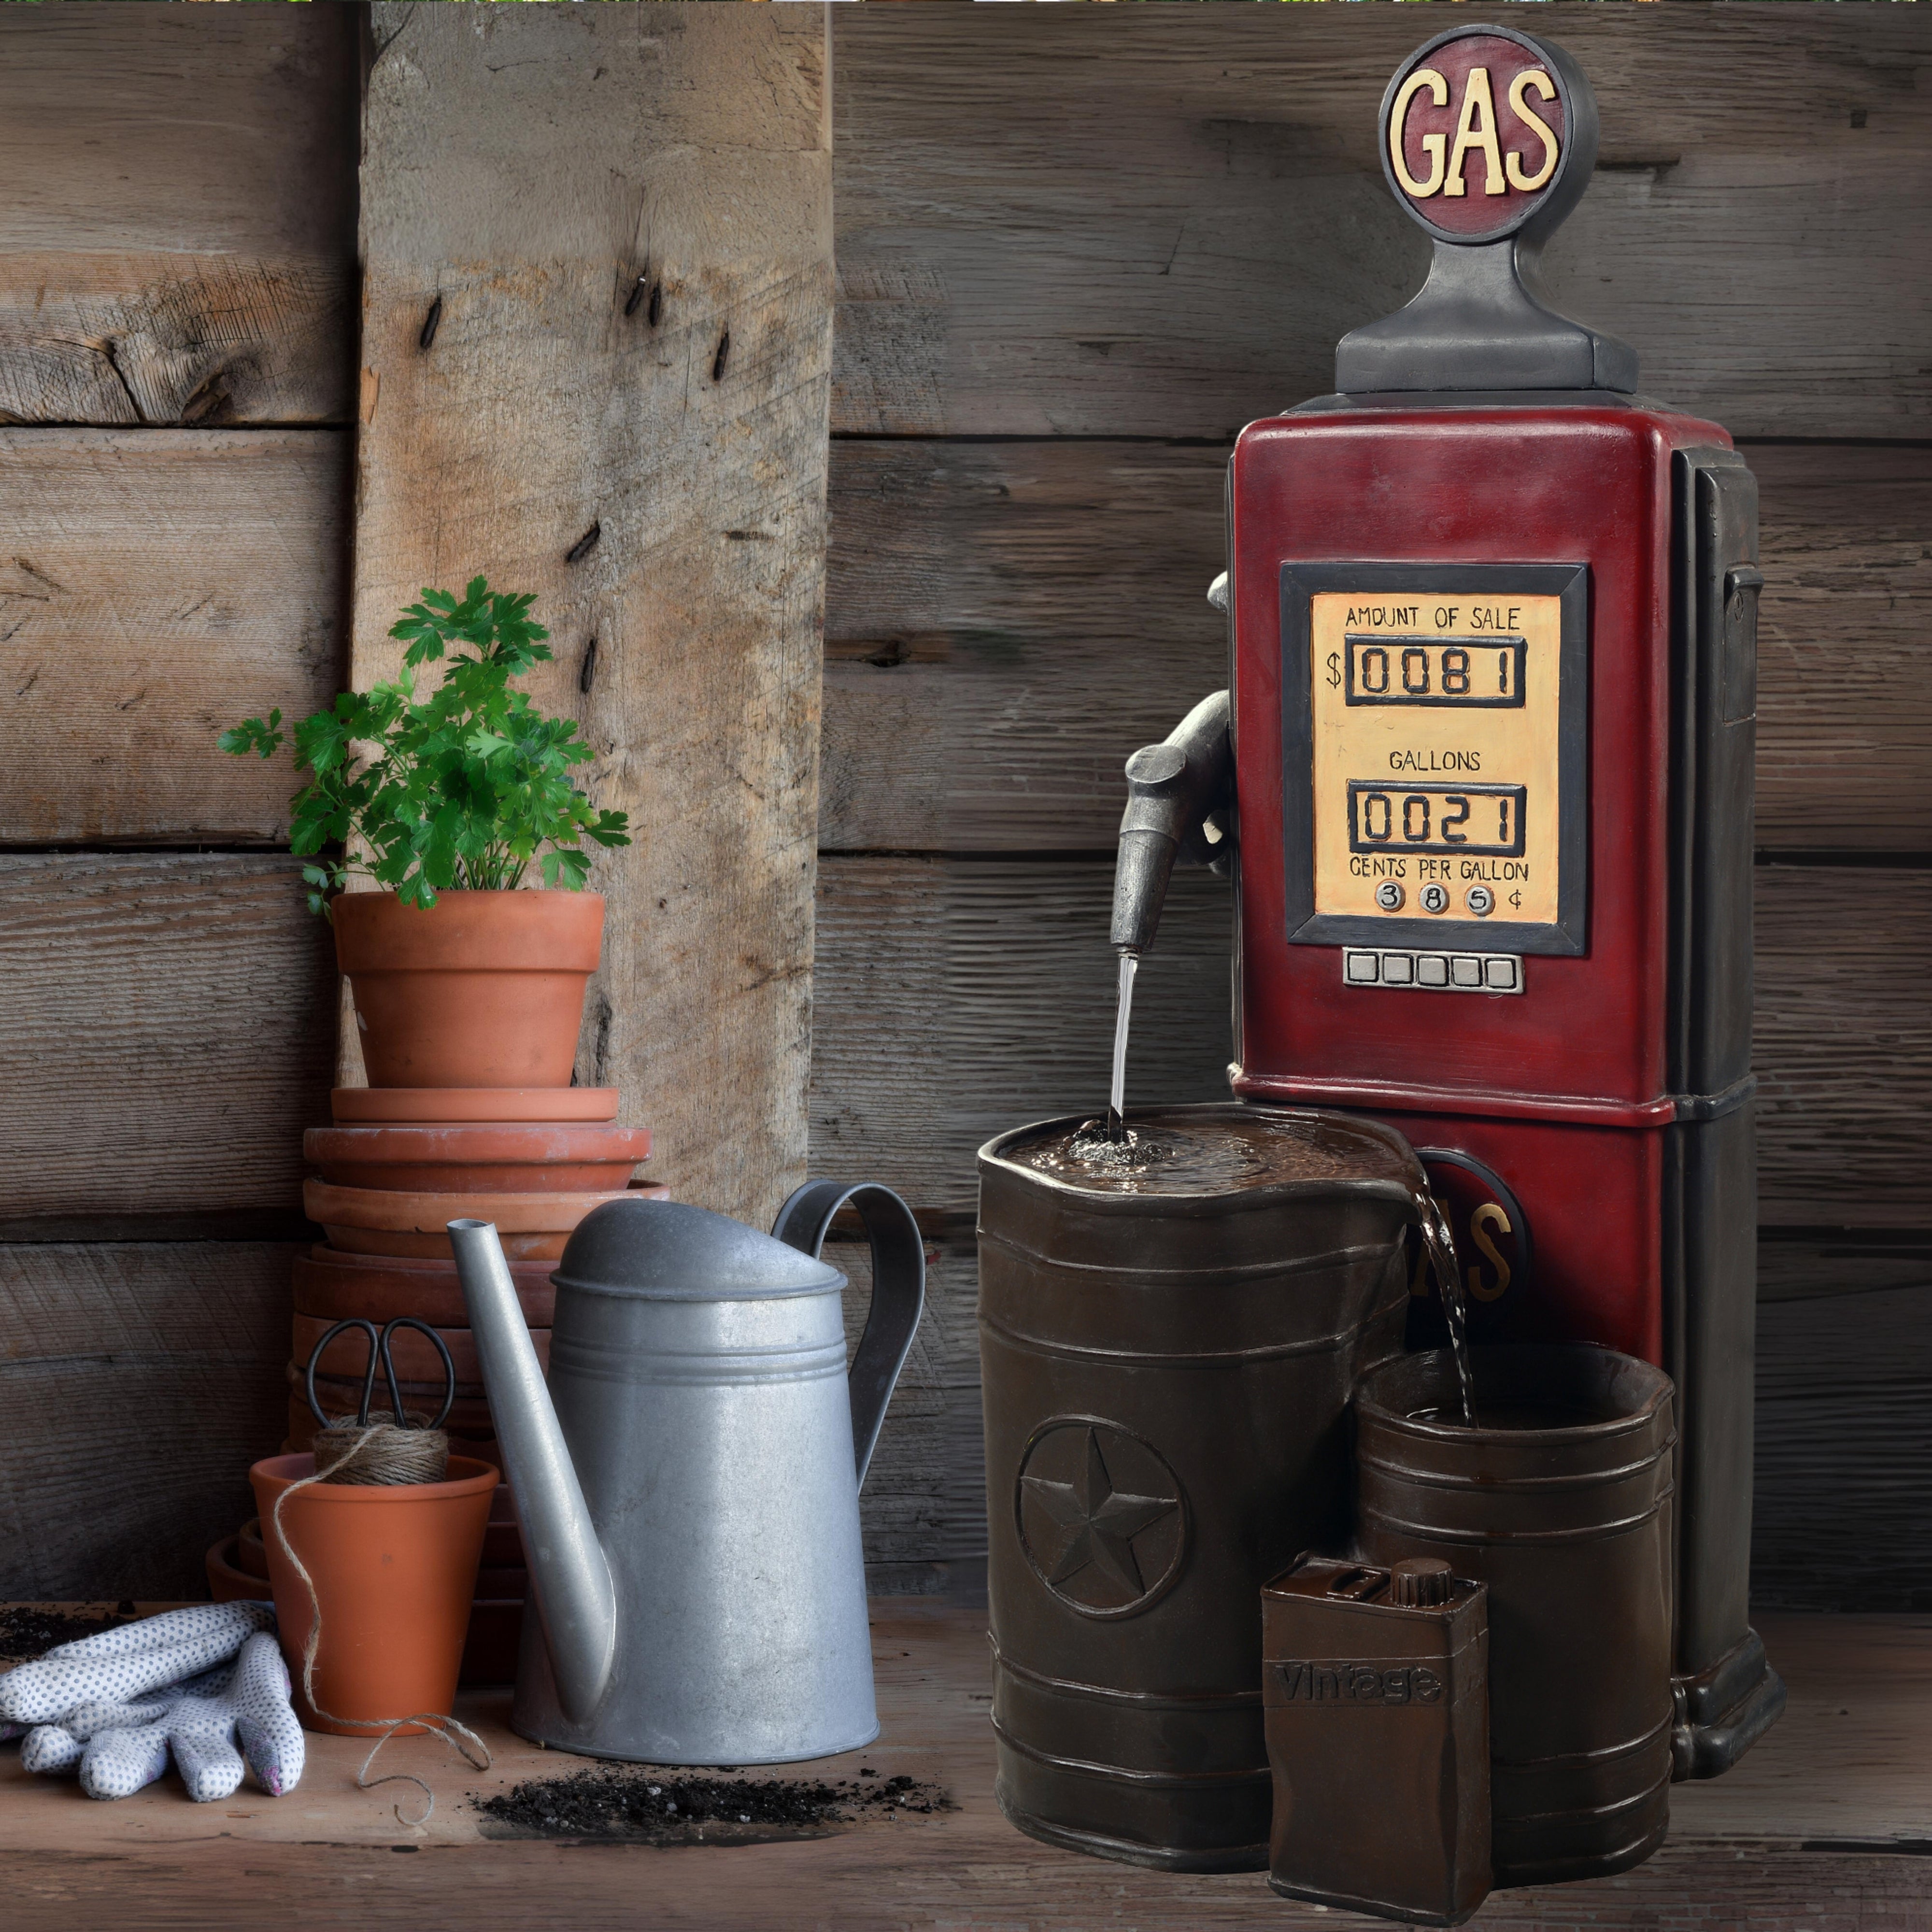 A vintage gas pump outdoor water fountain, plants and garden tools on a wooden floor